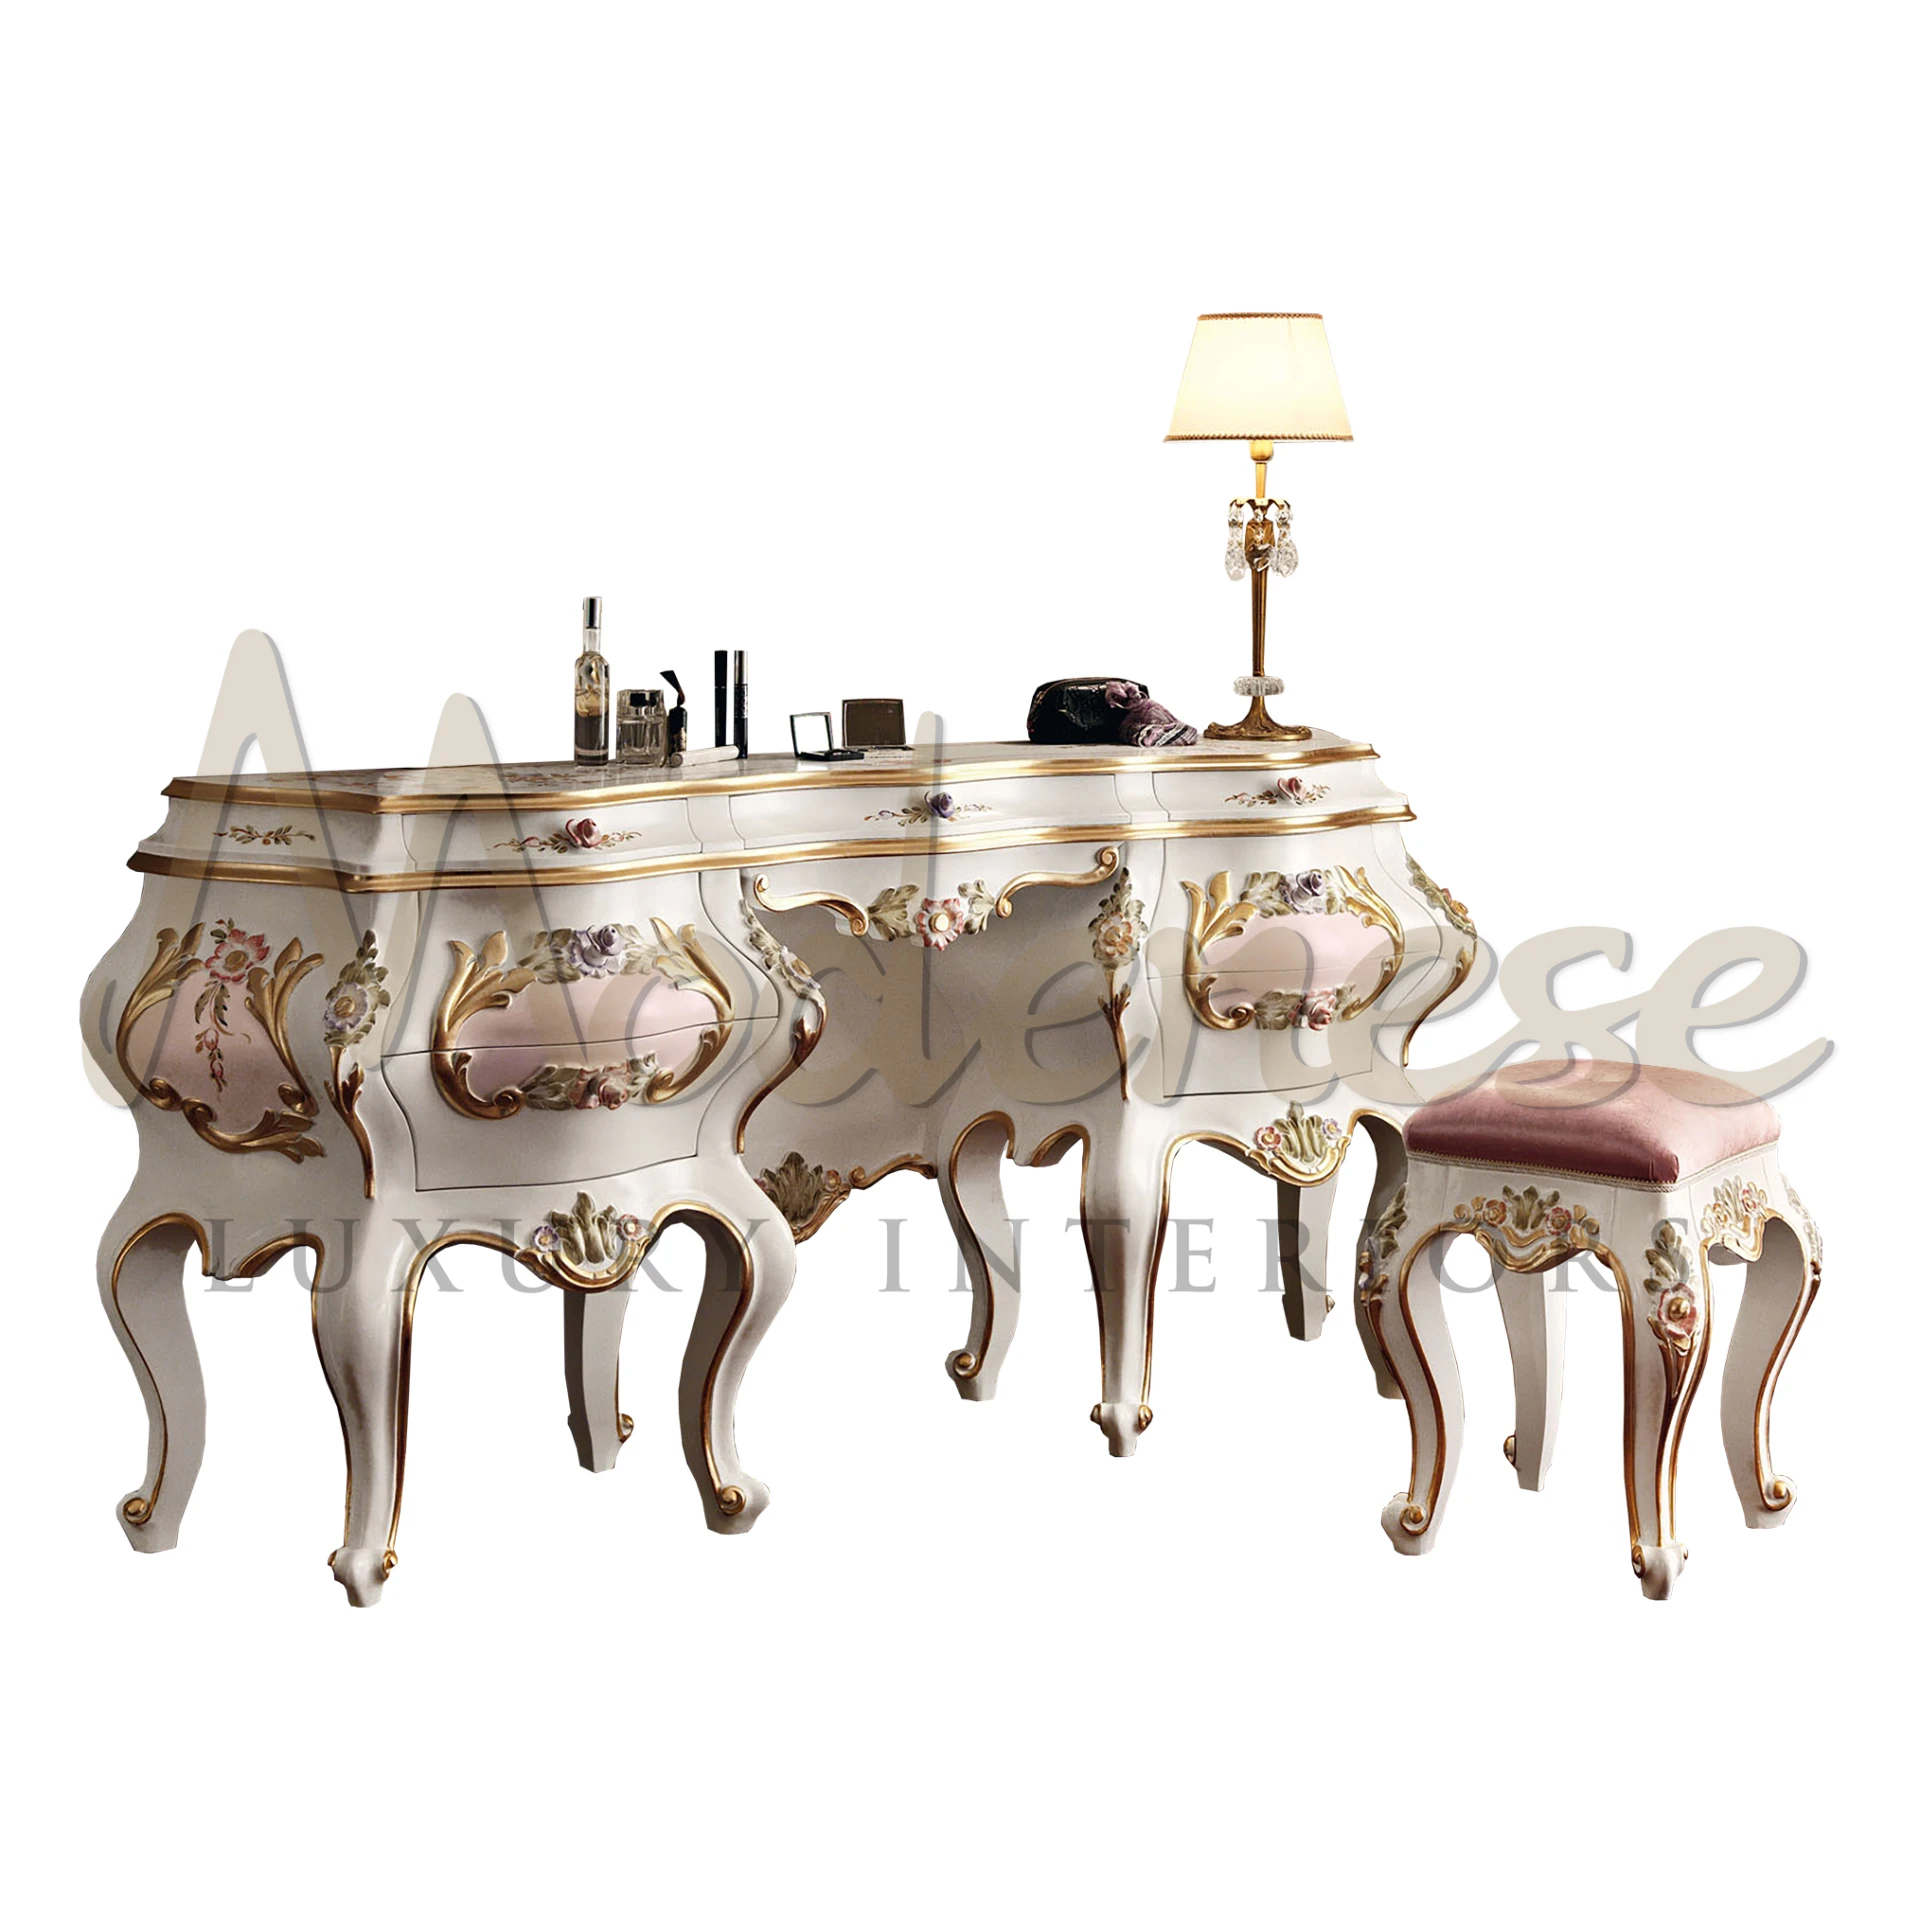 Vintage-inspired cream dressing table with hand-painted floral designs and gold accents, complete with a matching upholstered stool and a traditional lamp atop the table.